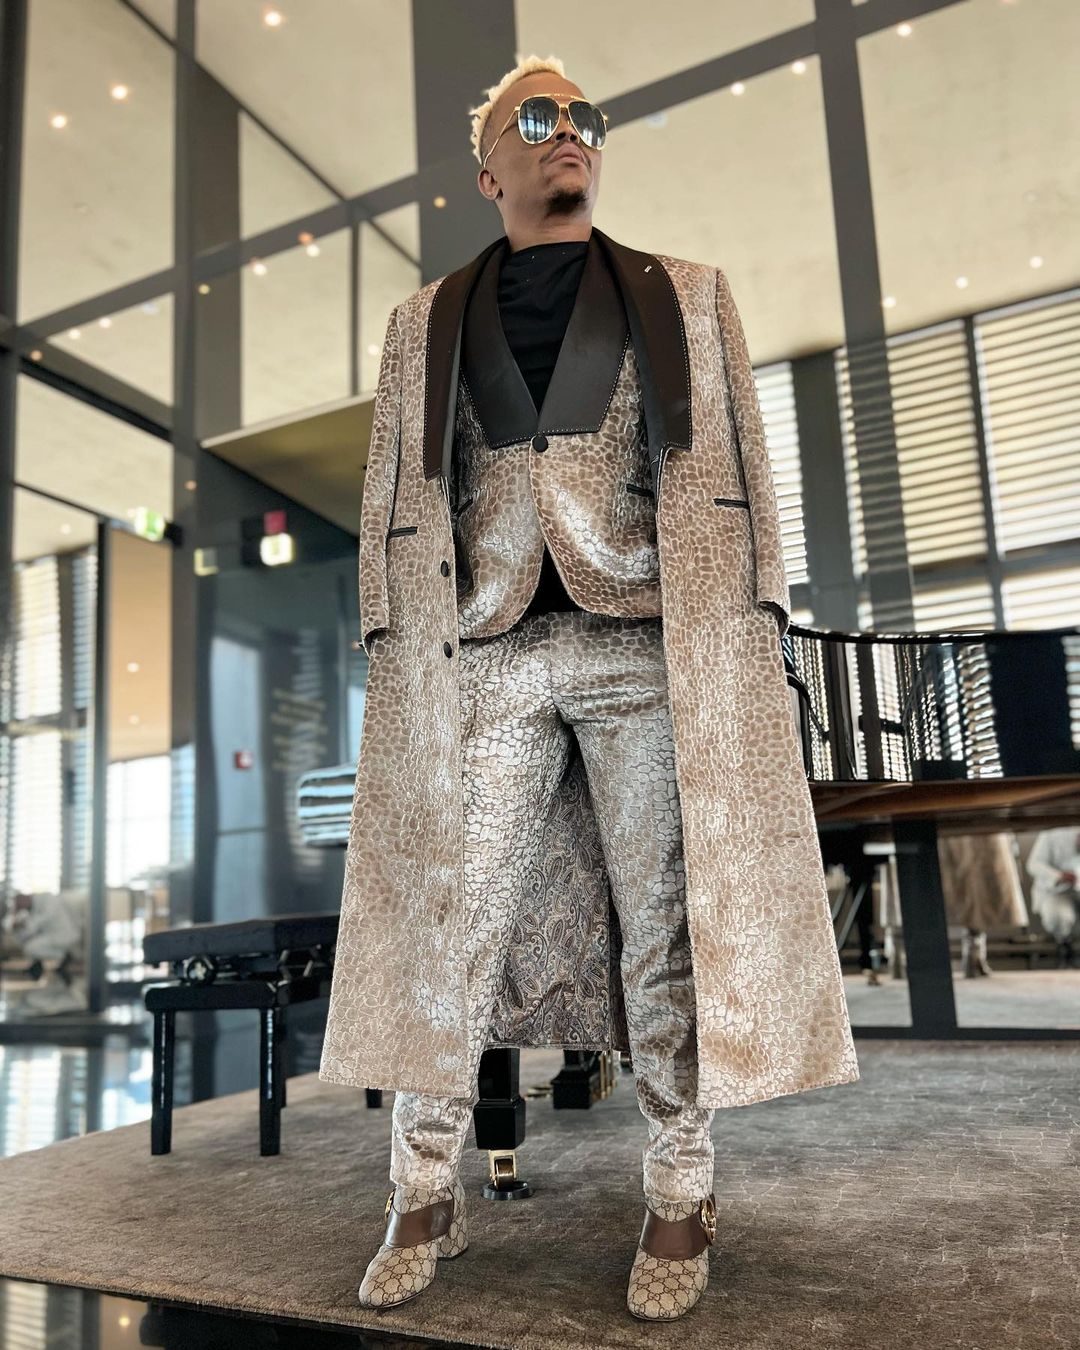 Somizi finds a crush and this time he is the one